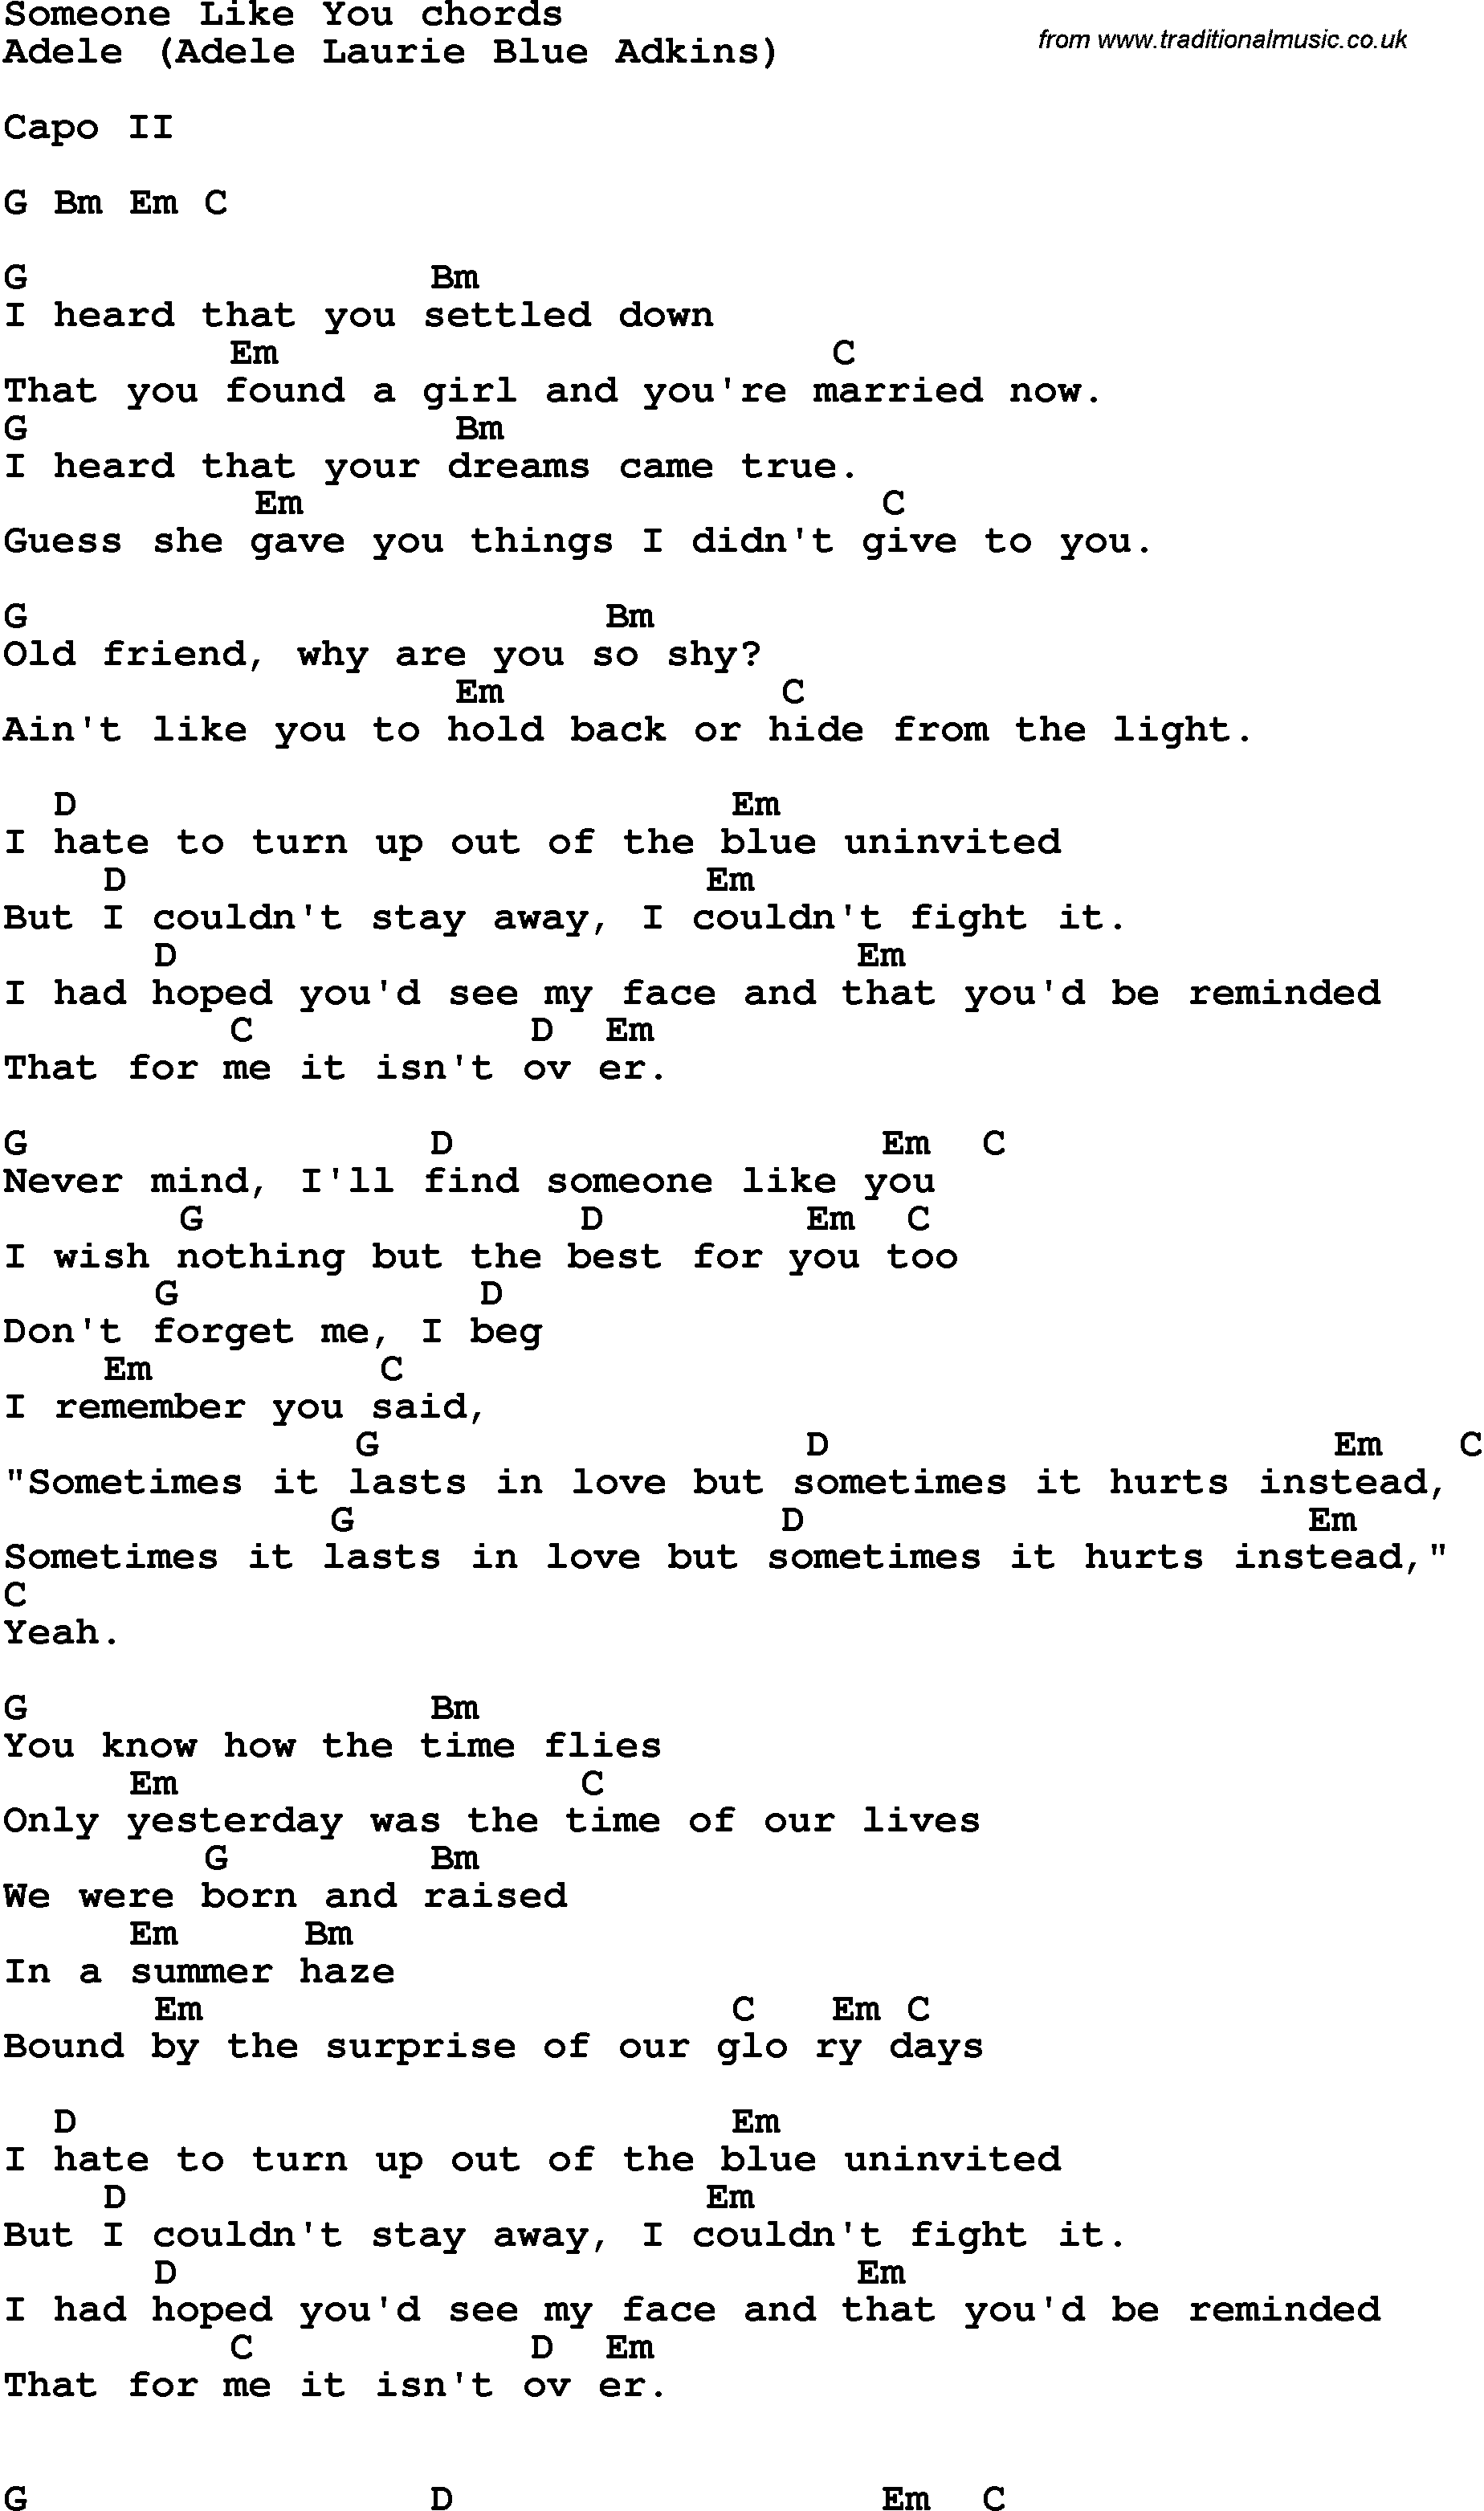 Song Lyrics with guitar chords for Someone Like You